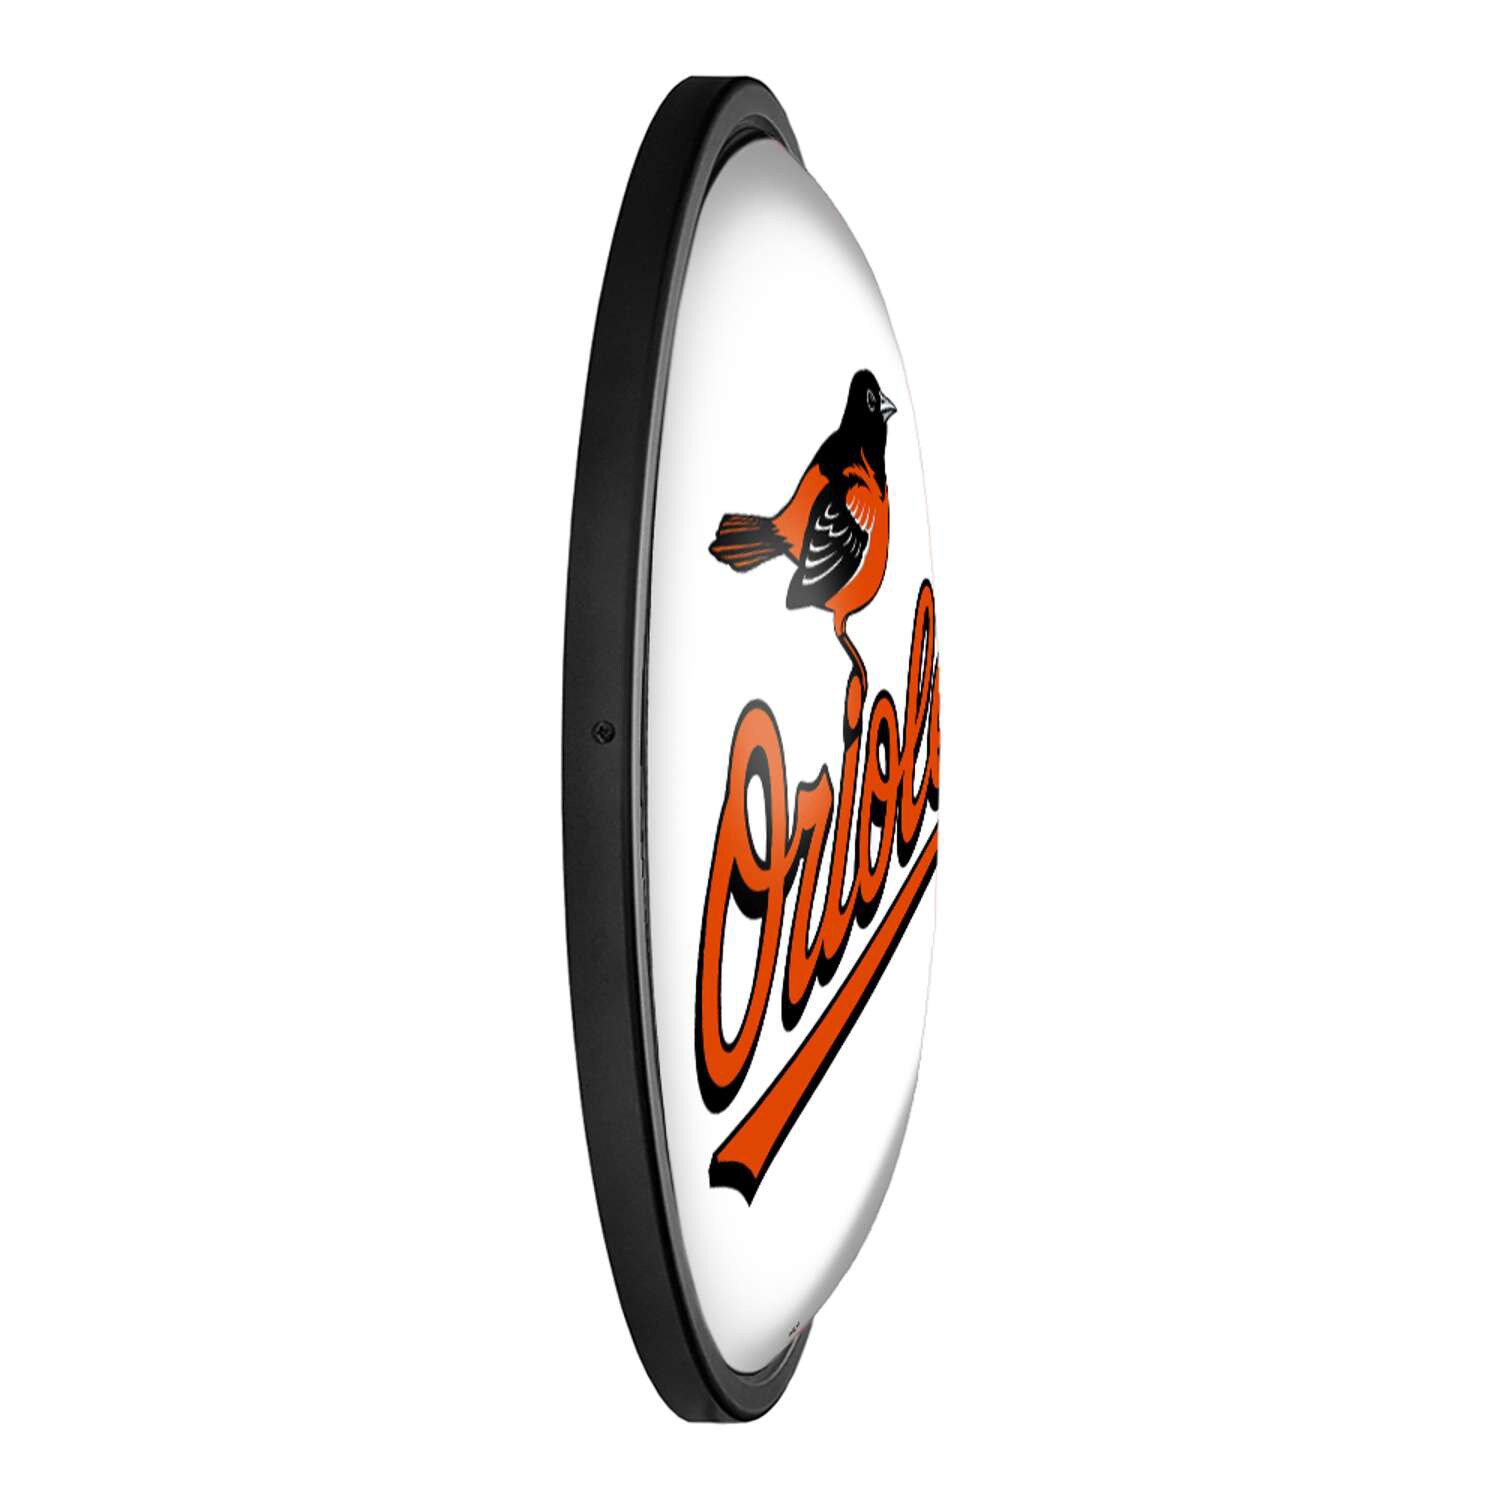 Chicago Cubs: Mascot - Round Slimline Lighted Wall Sign - The Fan-Brand